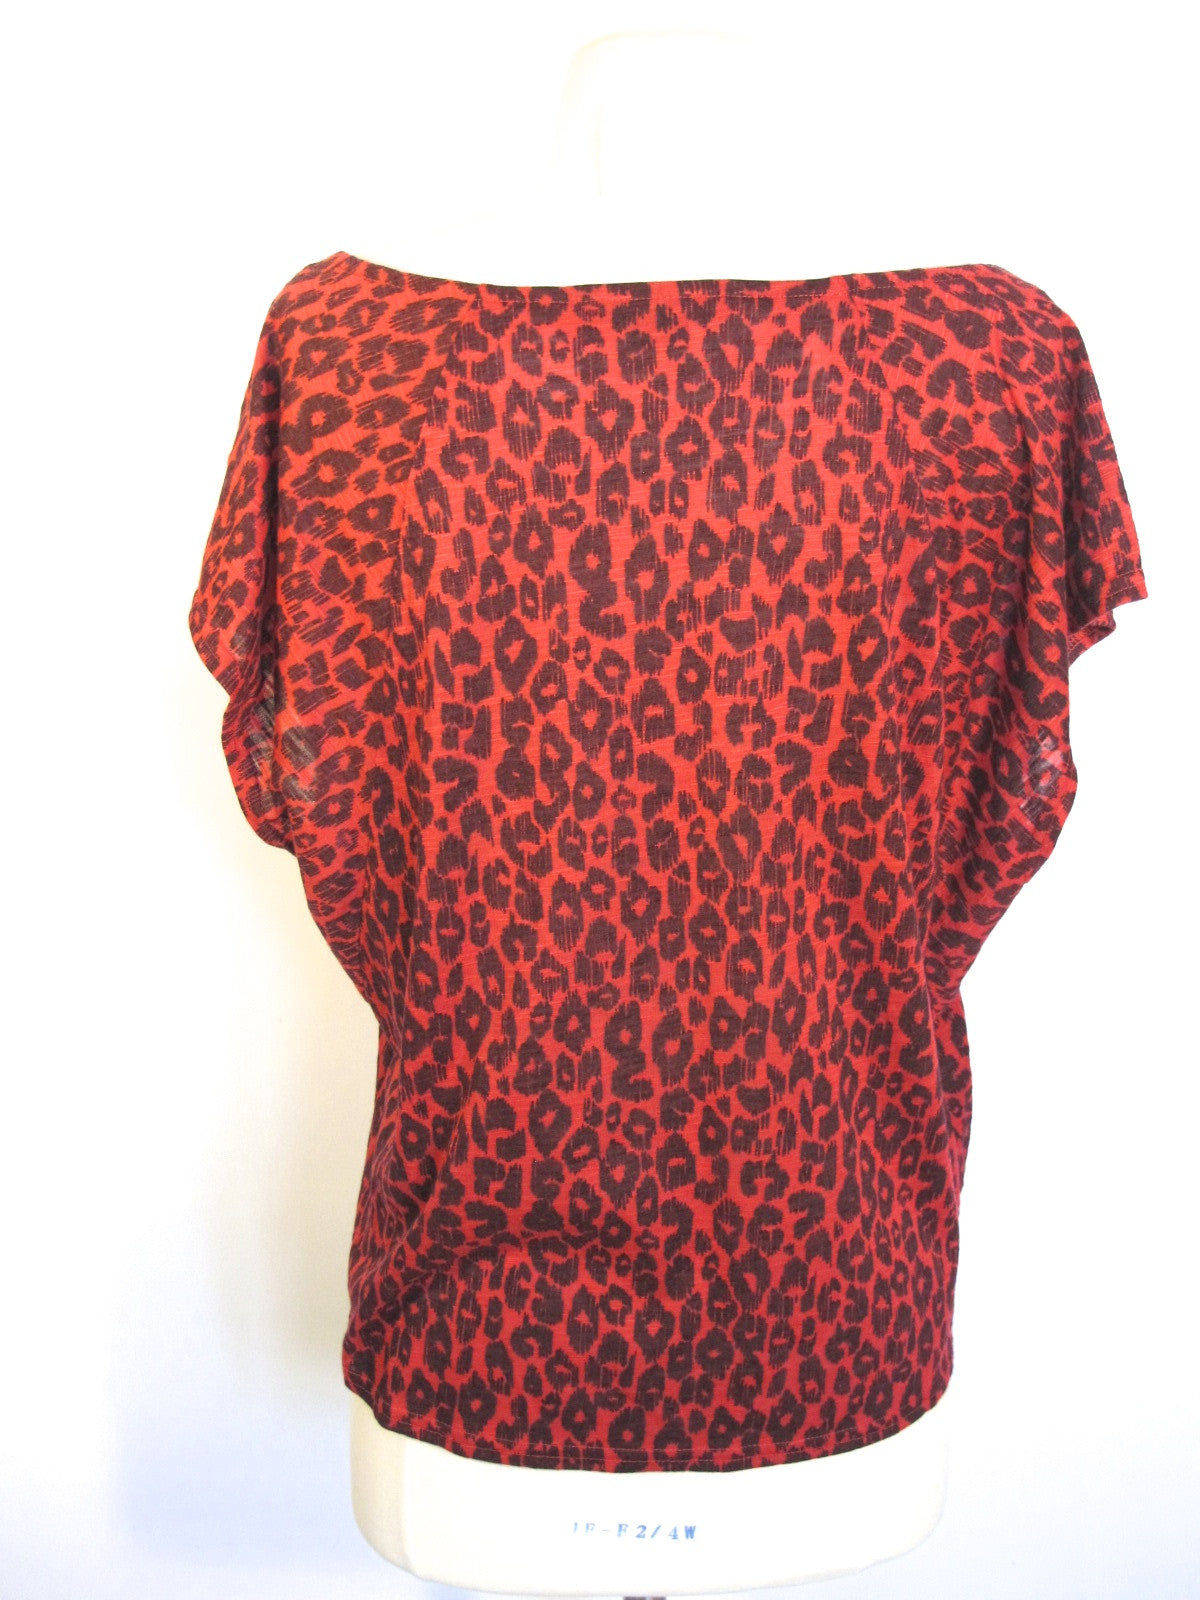 black and red leopard print top